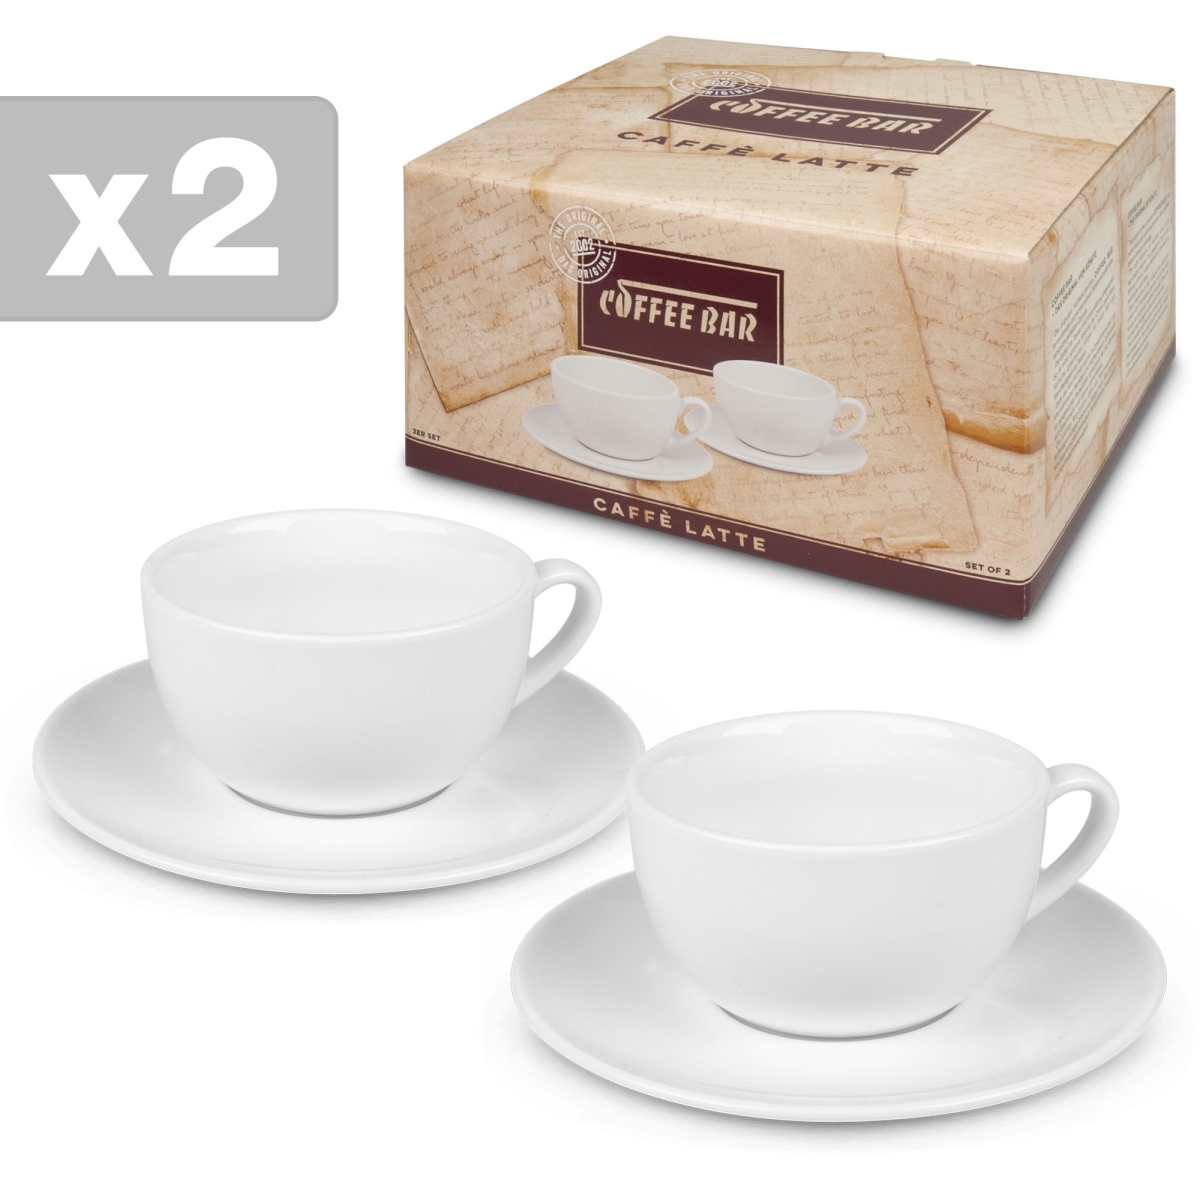 27 5 A11 0001 No-11a Two Giftboxed Cafe Latte Cups & Saucers -set Of 2